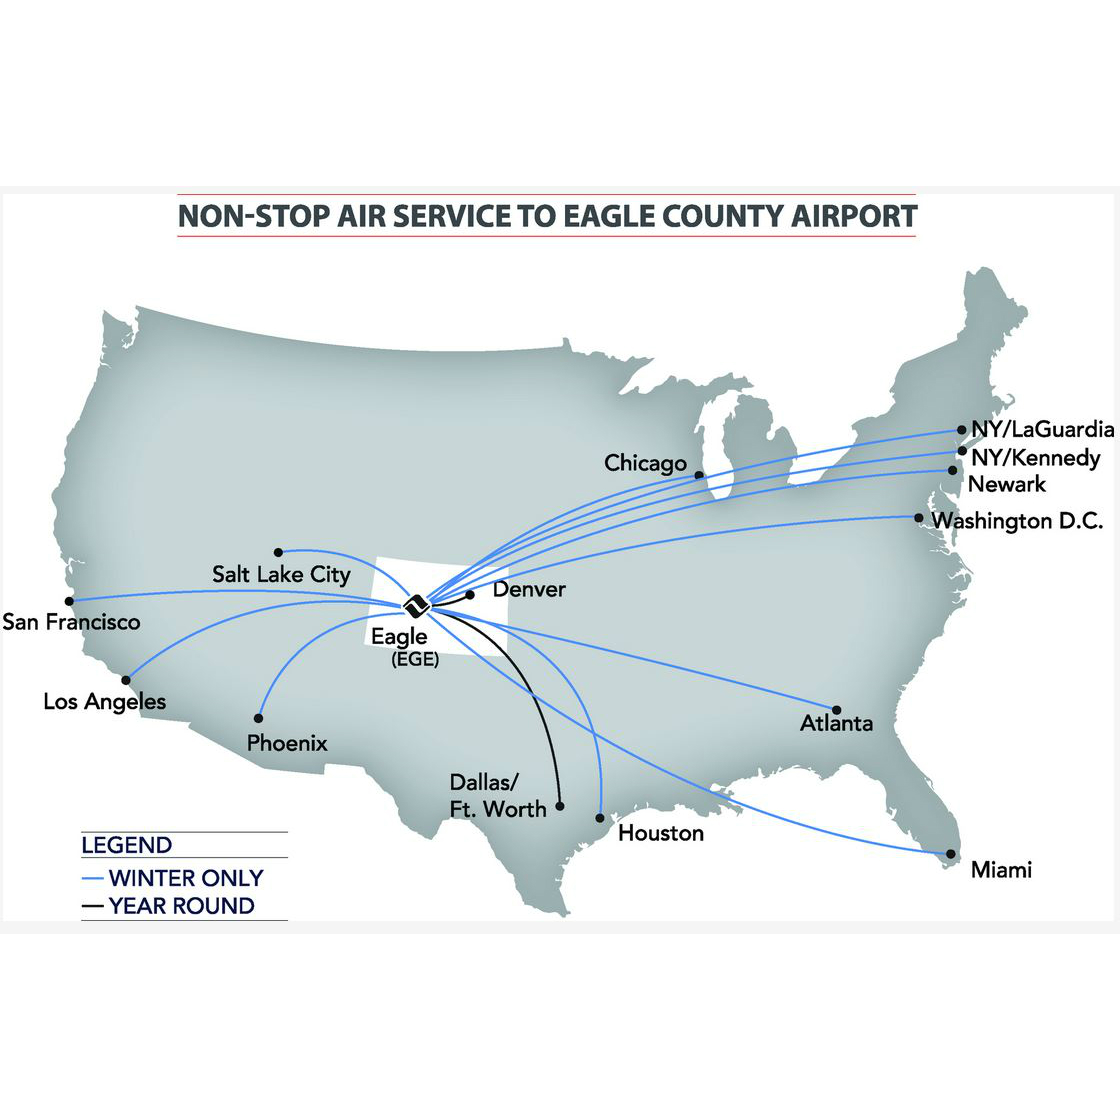 Non-stop air service map to Eagle County airport